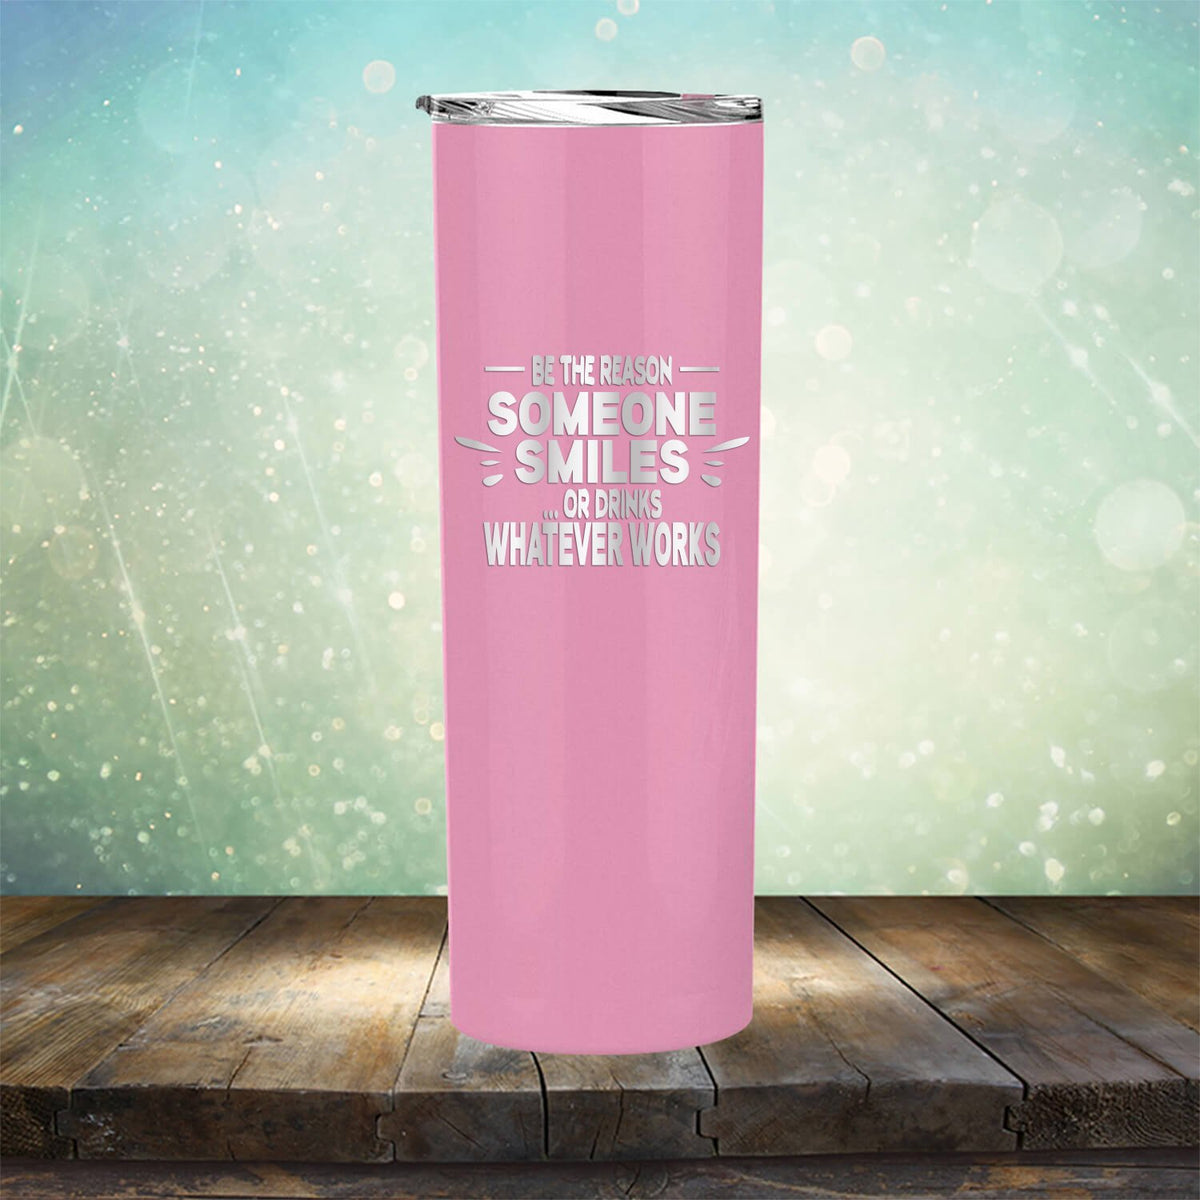 Be The Reason Someone Smiles Or Drinks Whatever Works - Laser Etched Tumbler Mug